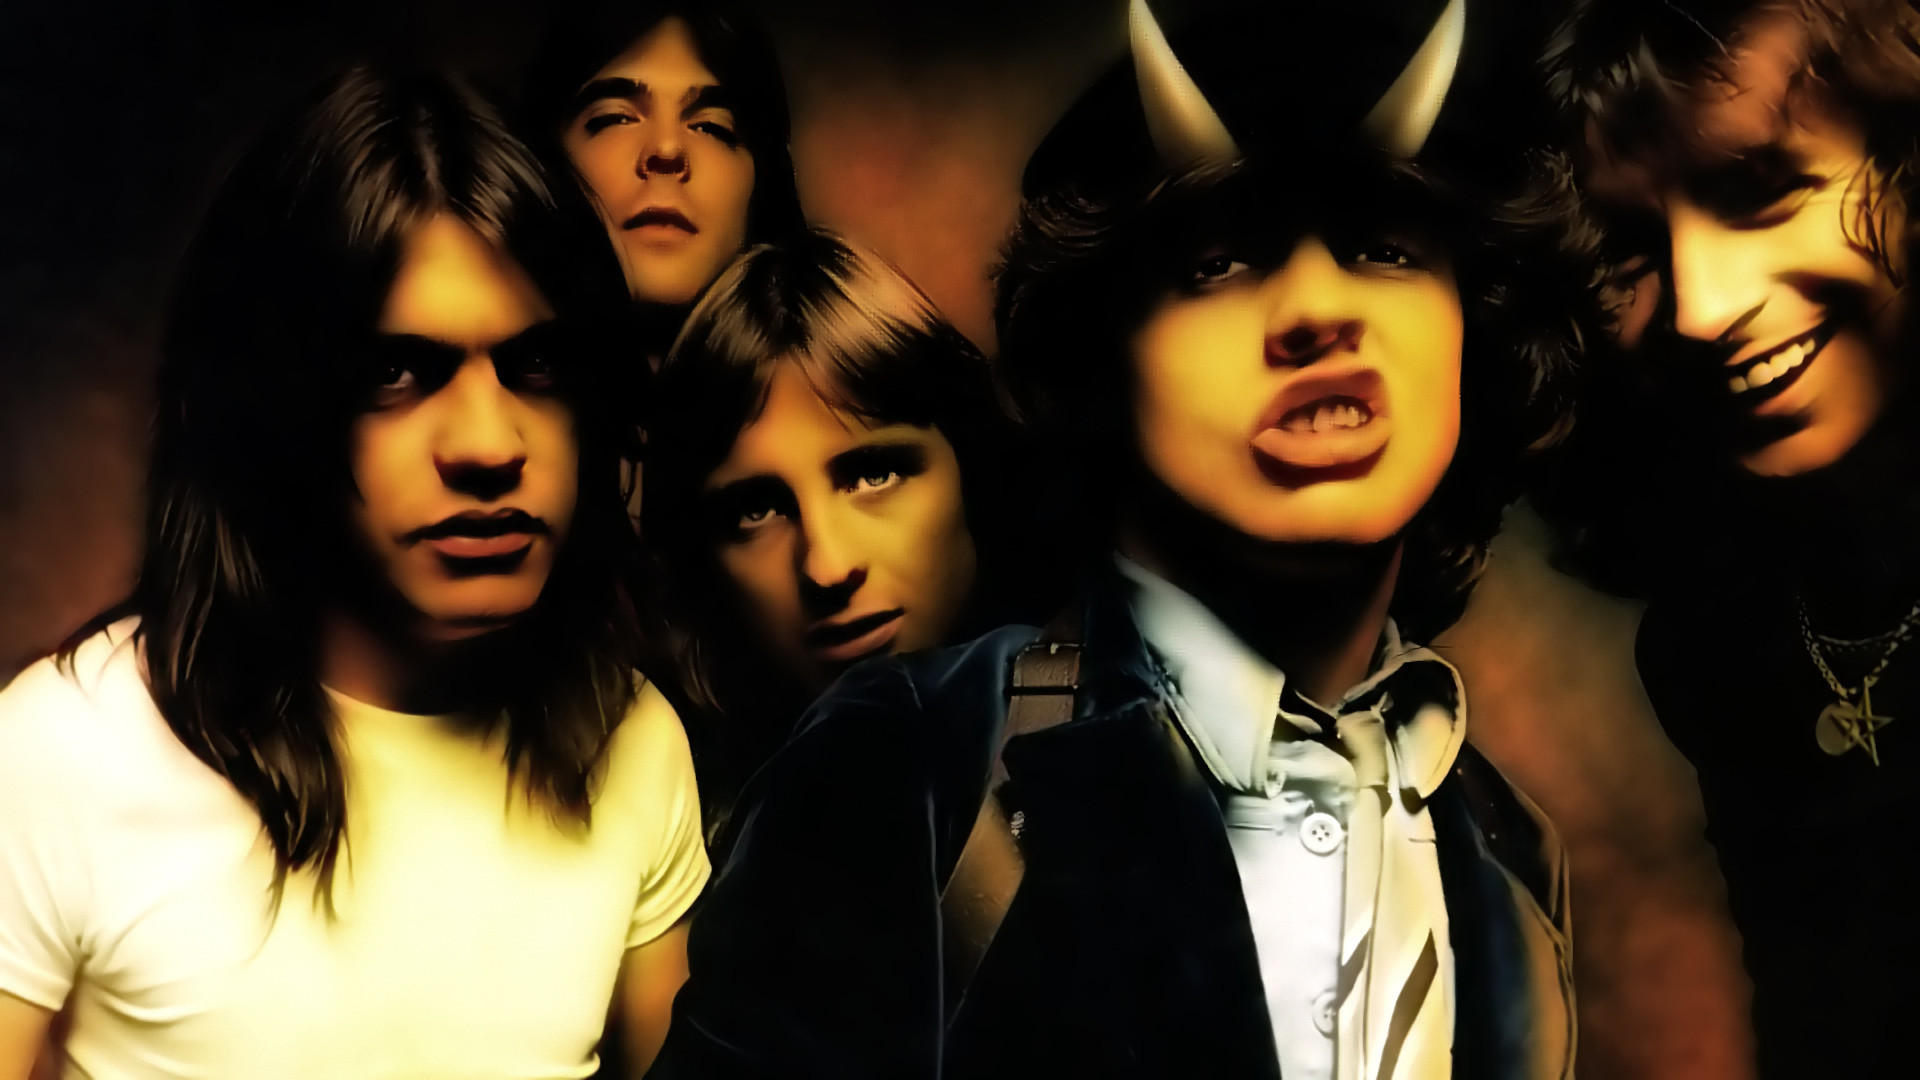 1920x1080 From AC/DC to The Lazys: 5 bands who've killed it on the Aus...